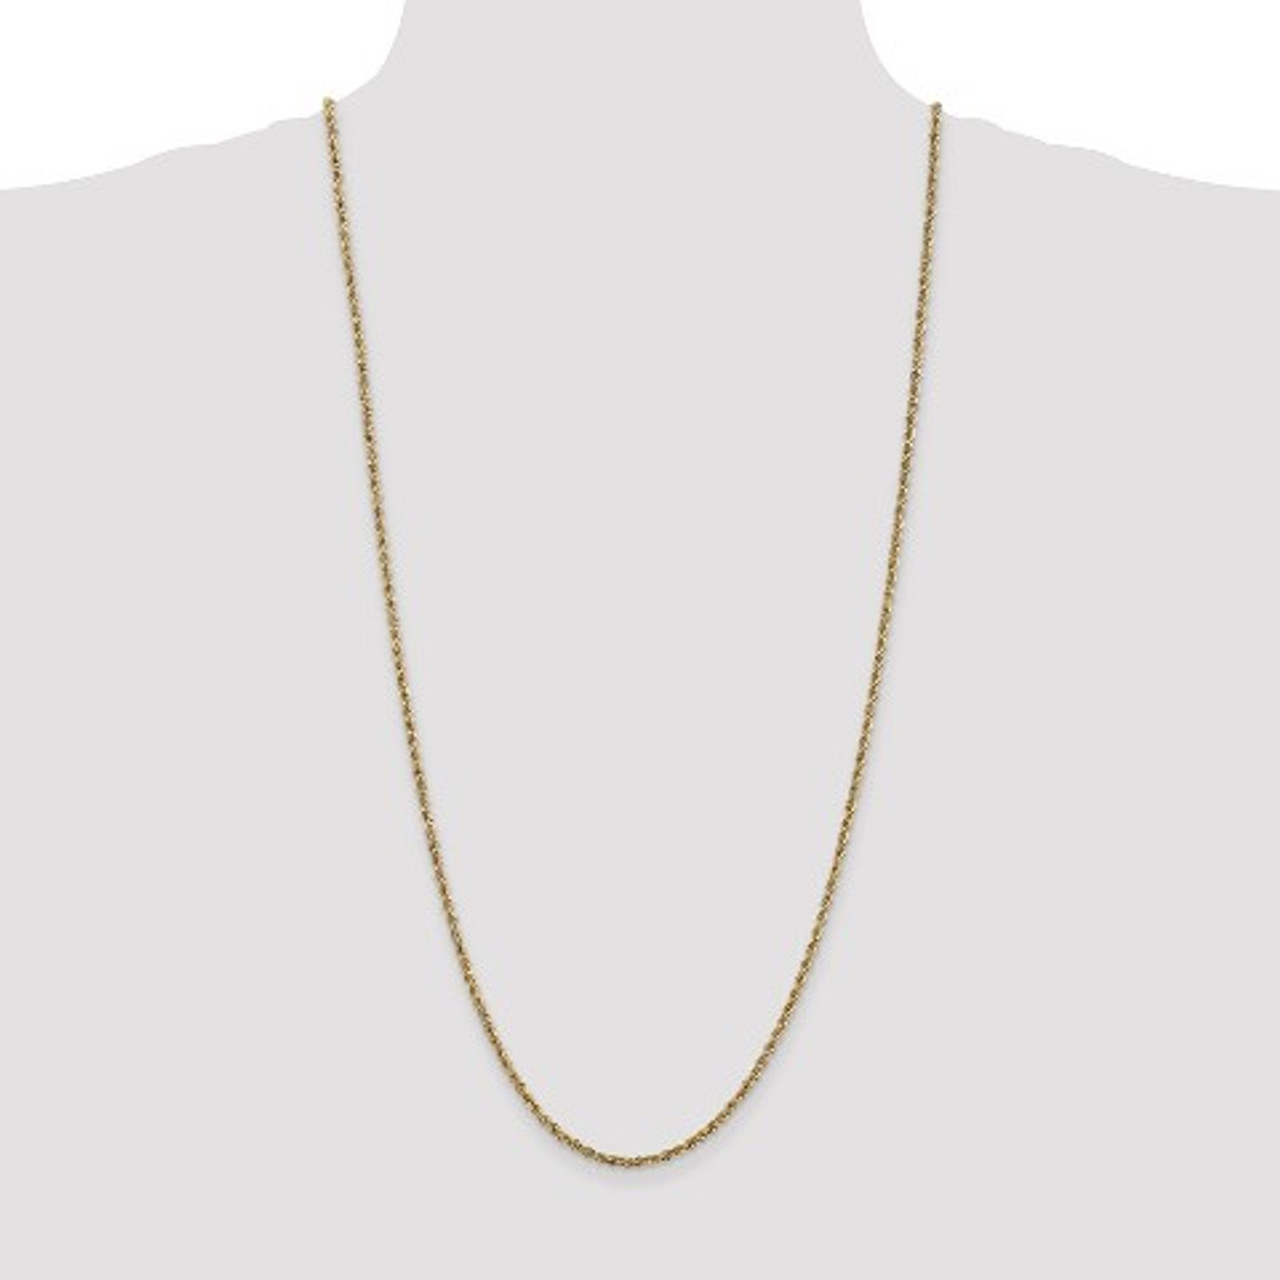 High-Polish Square Oval Chain Necklace 24K Yellow Gold 18